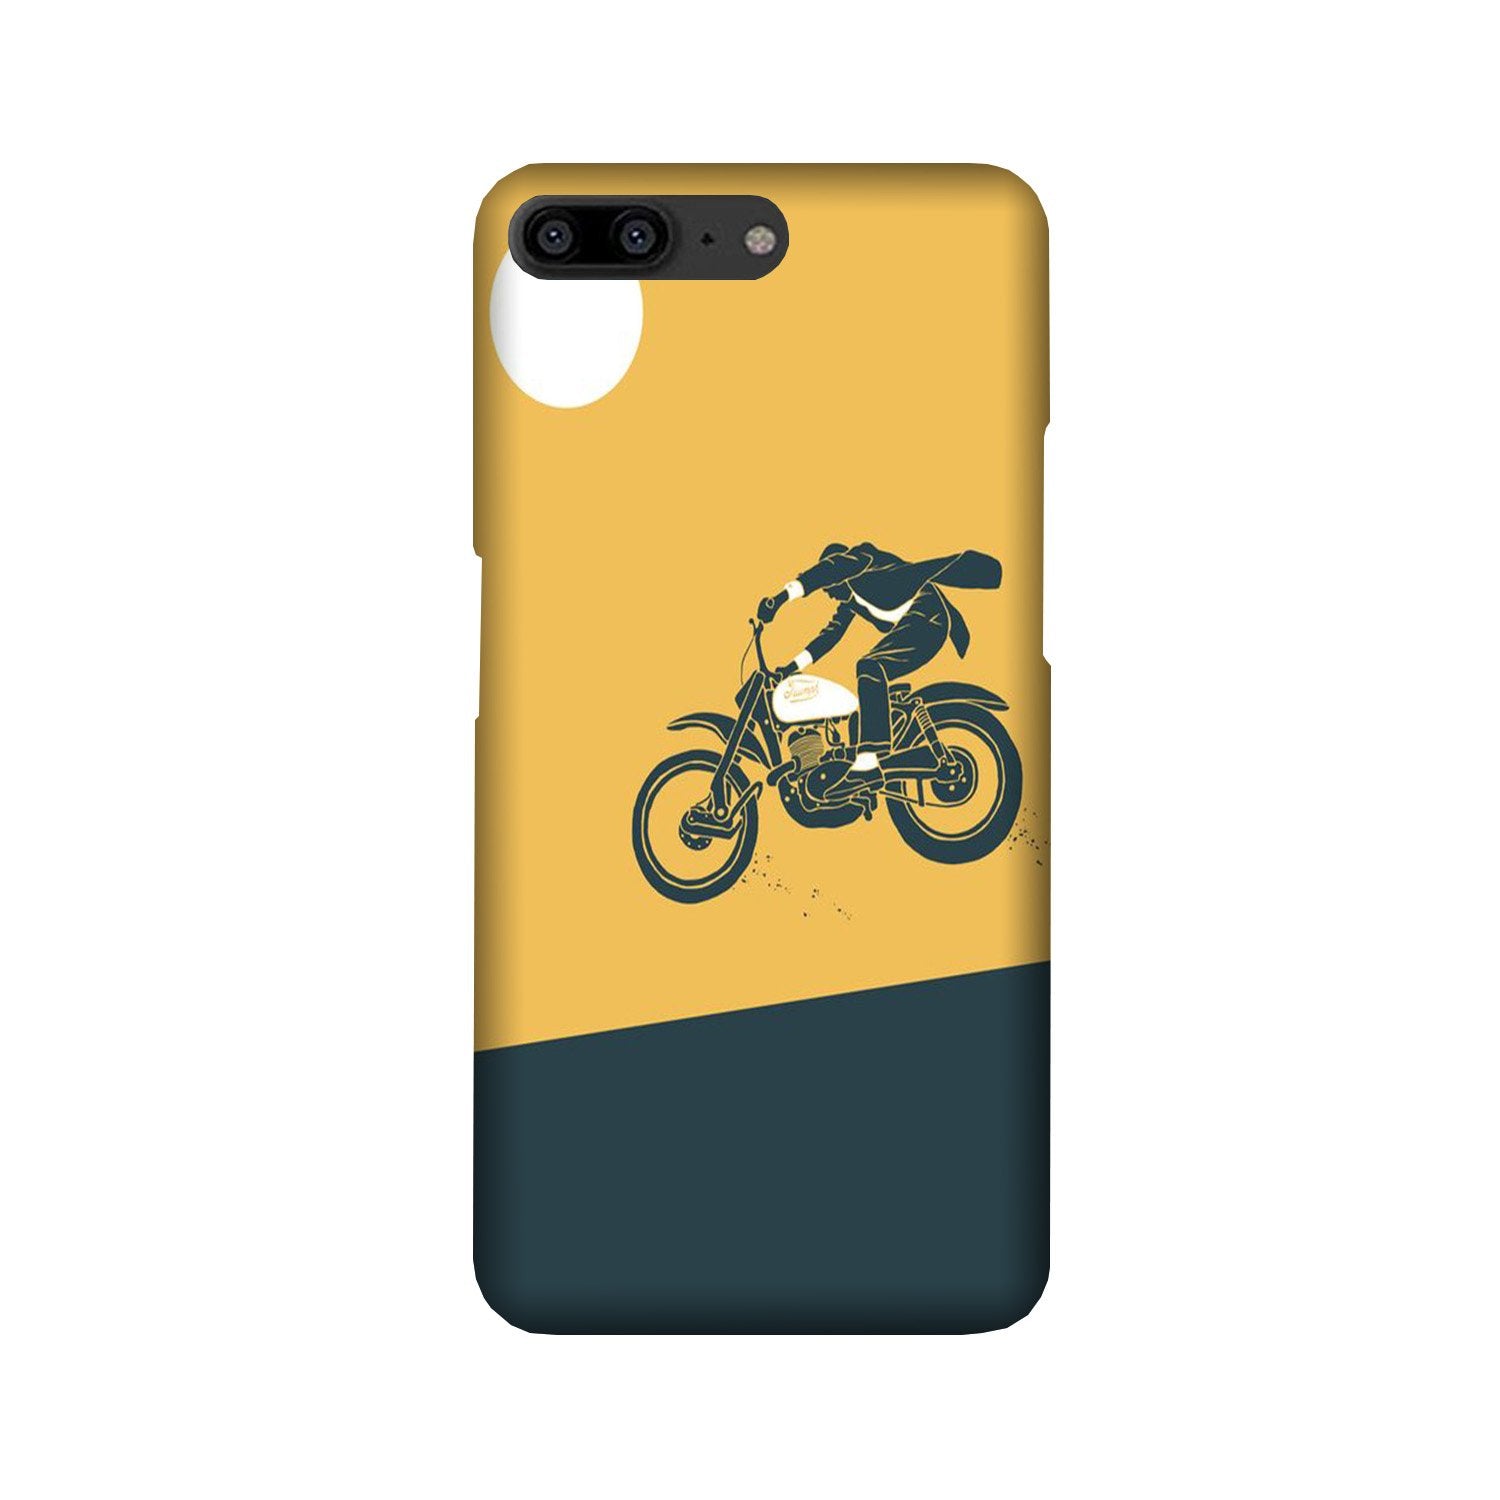 Bike Lovers Case for OnePlus 5 (Design No. 256)